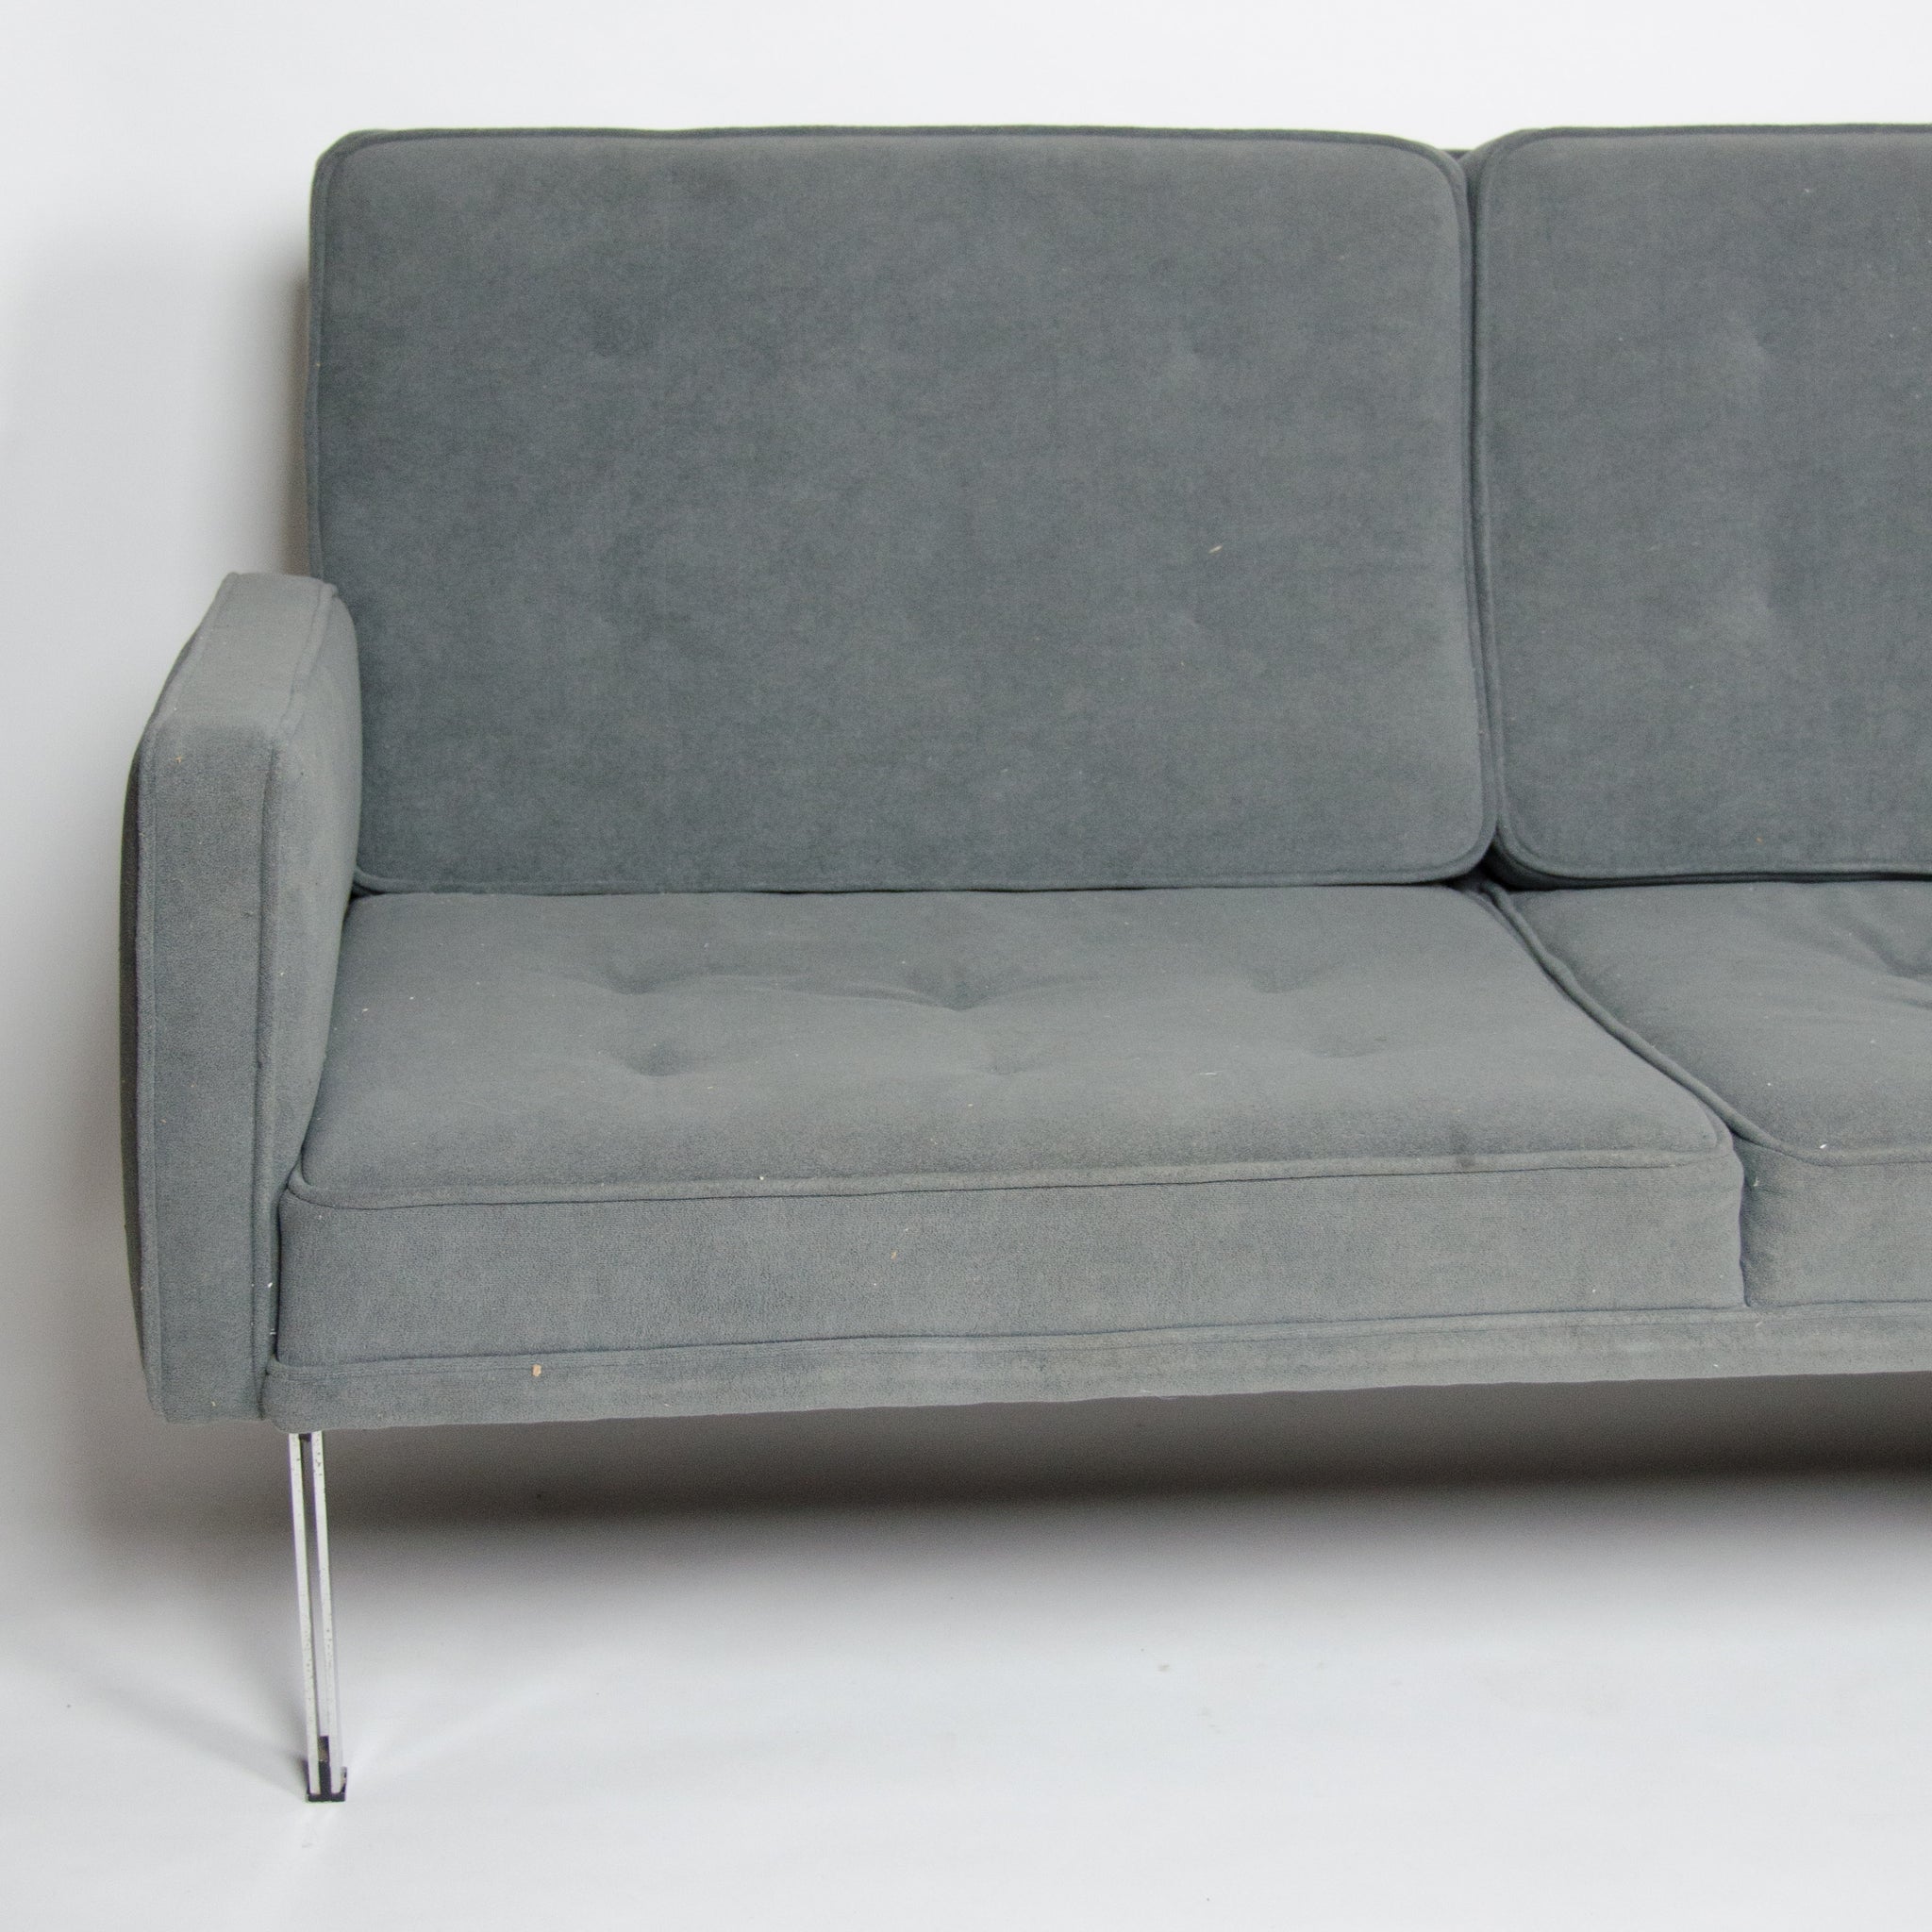 SOLD Florence Knoll Parallel Bar Three Seat Sofa Model 57 With New Gray Upholstery